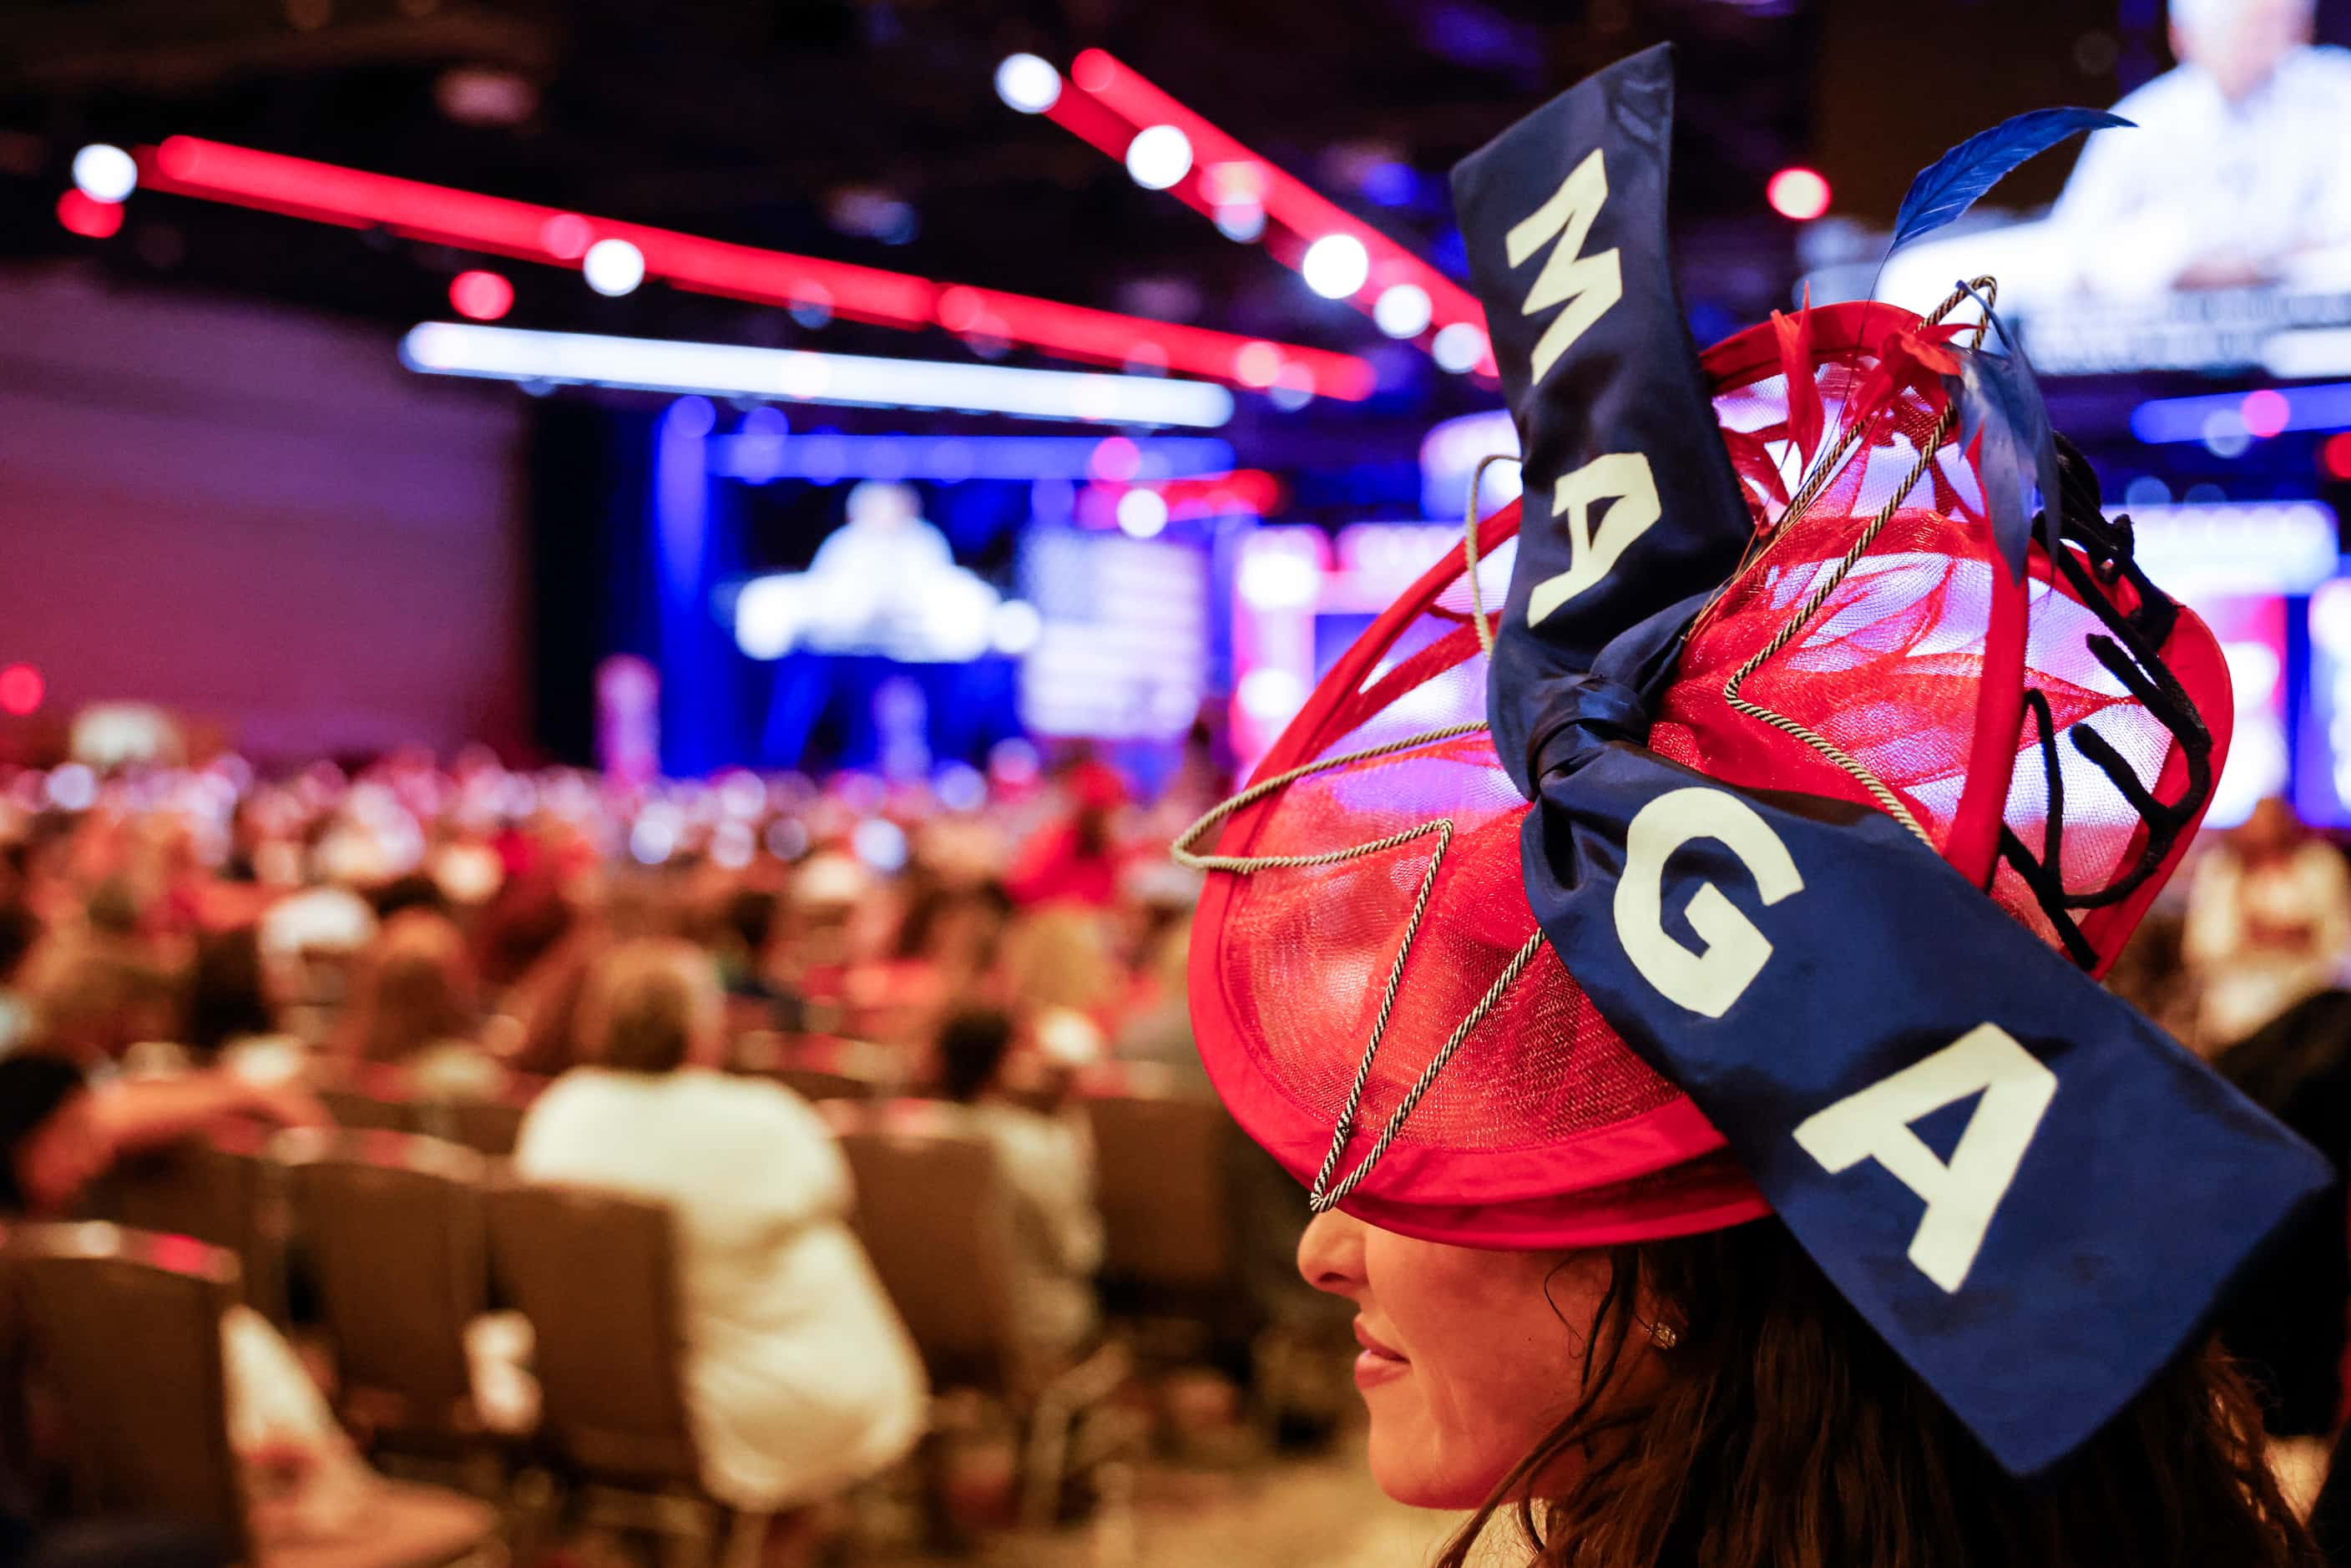 Attendee Meghan Anderson wearing a MAGA designed hat watches the third day of Conservative...